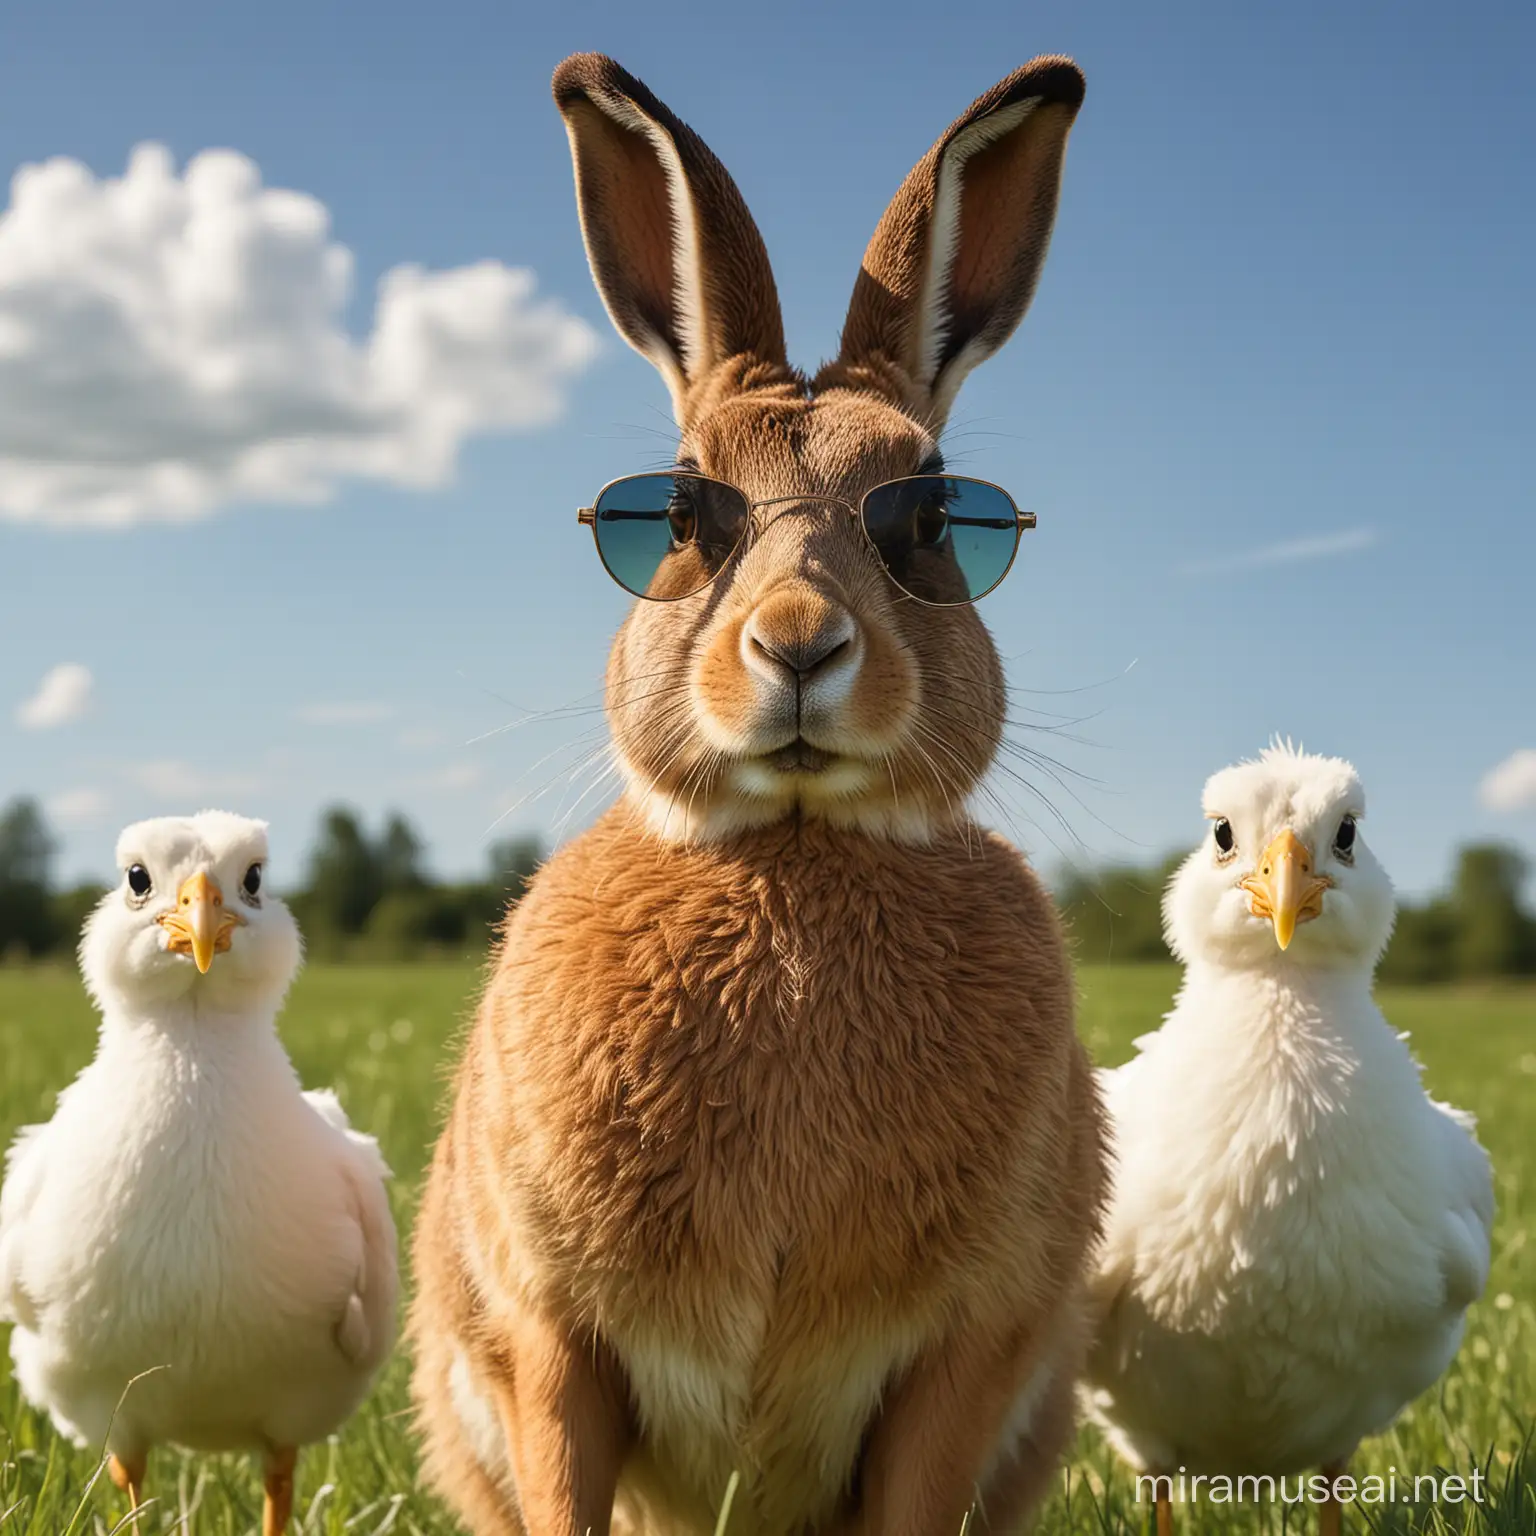 Brown Hare in Sunglasses with White Chickens on a Green Meadow under a Blue Summer Sky